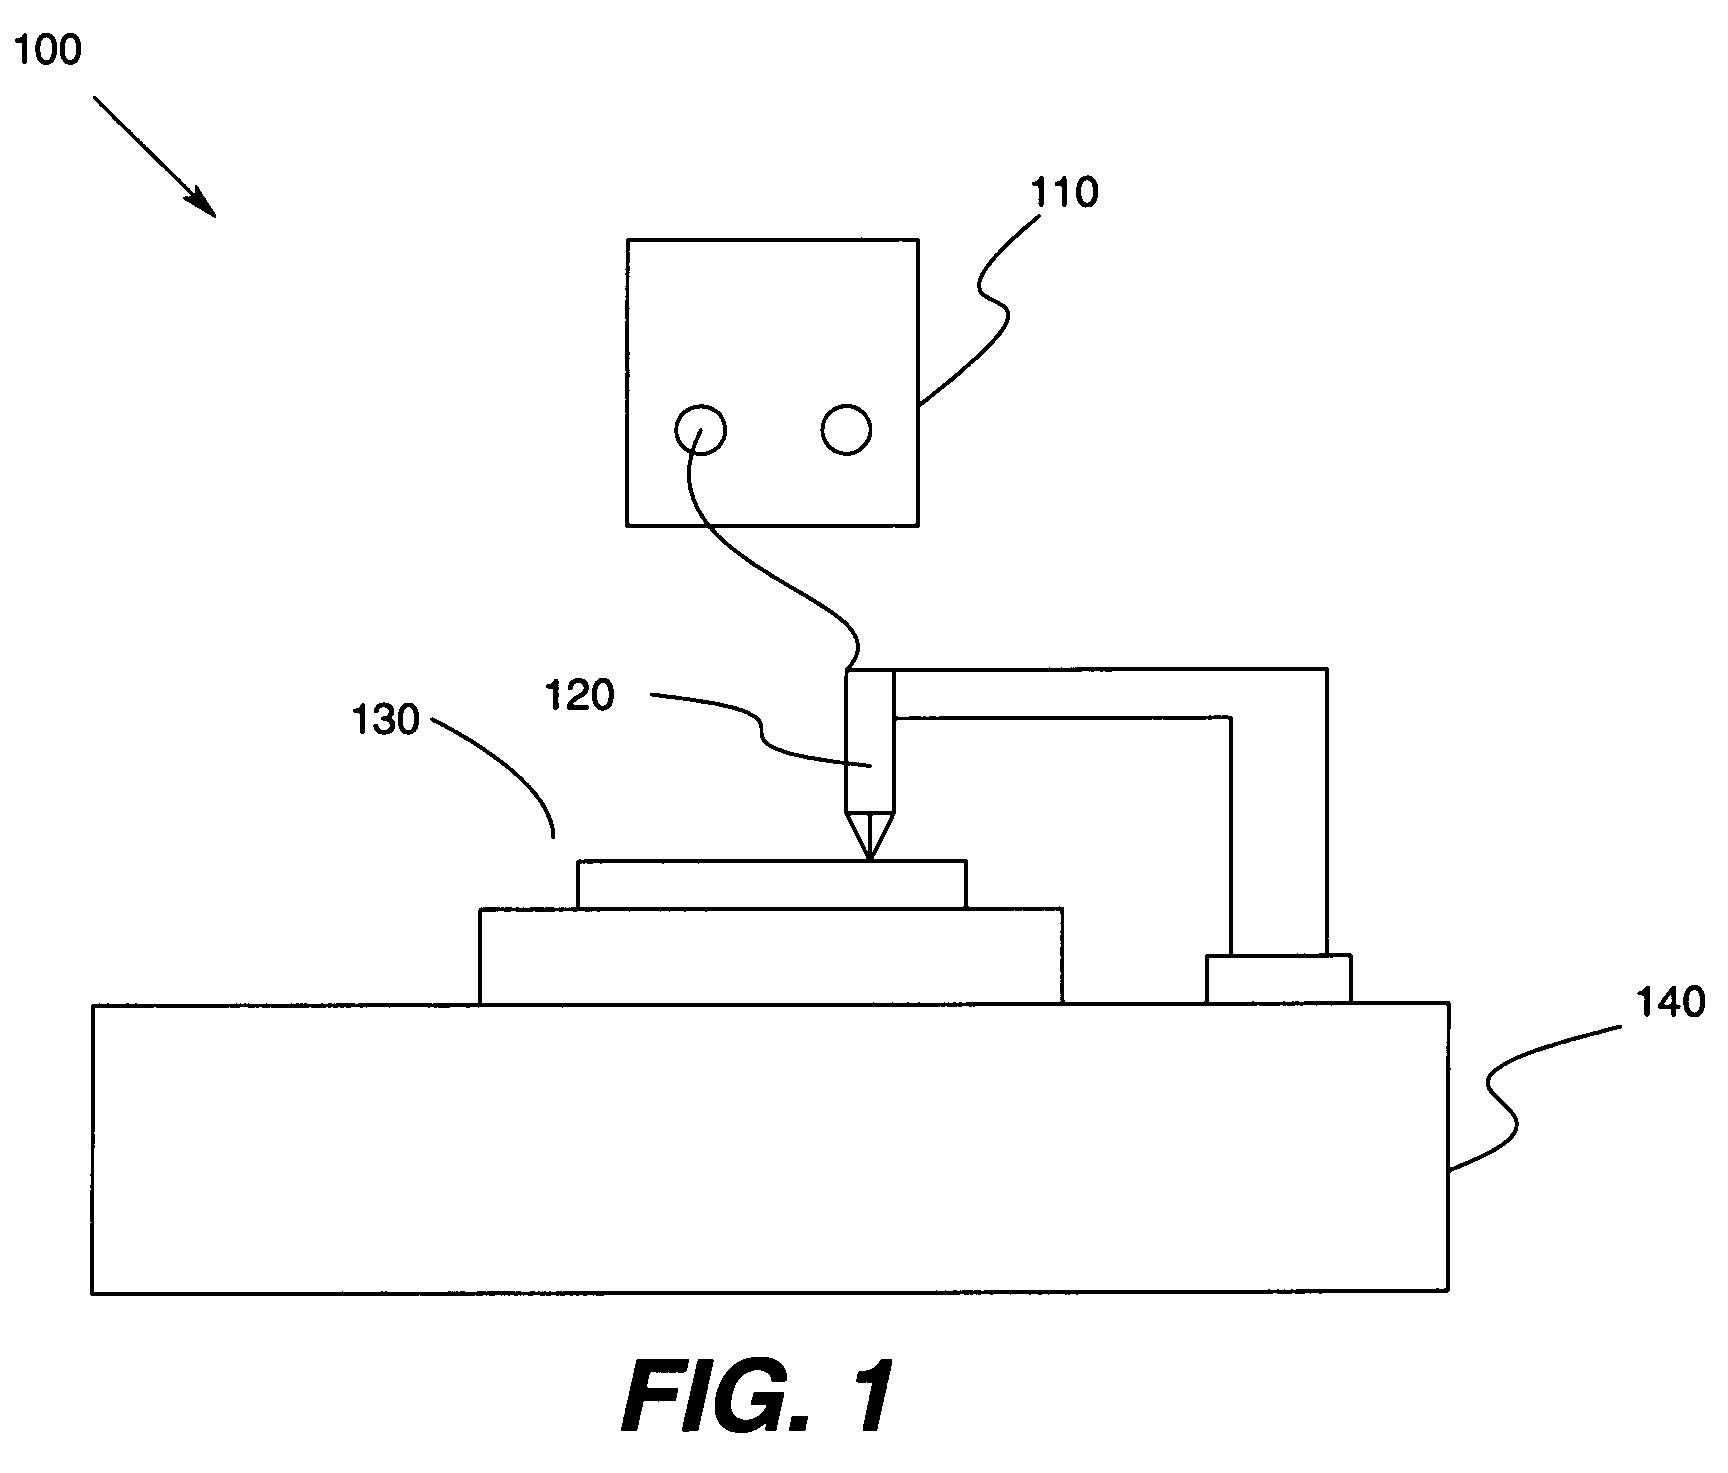 Apparatus for performing high frequency electronic package testing